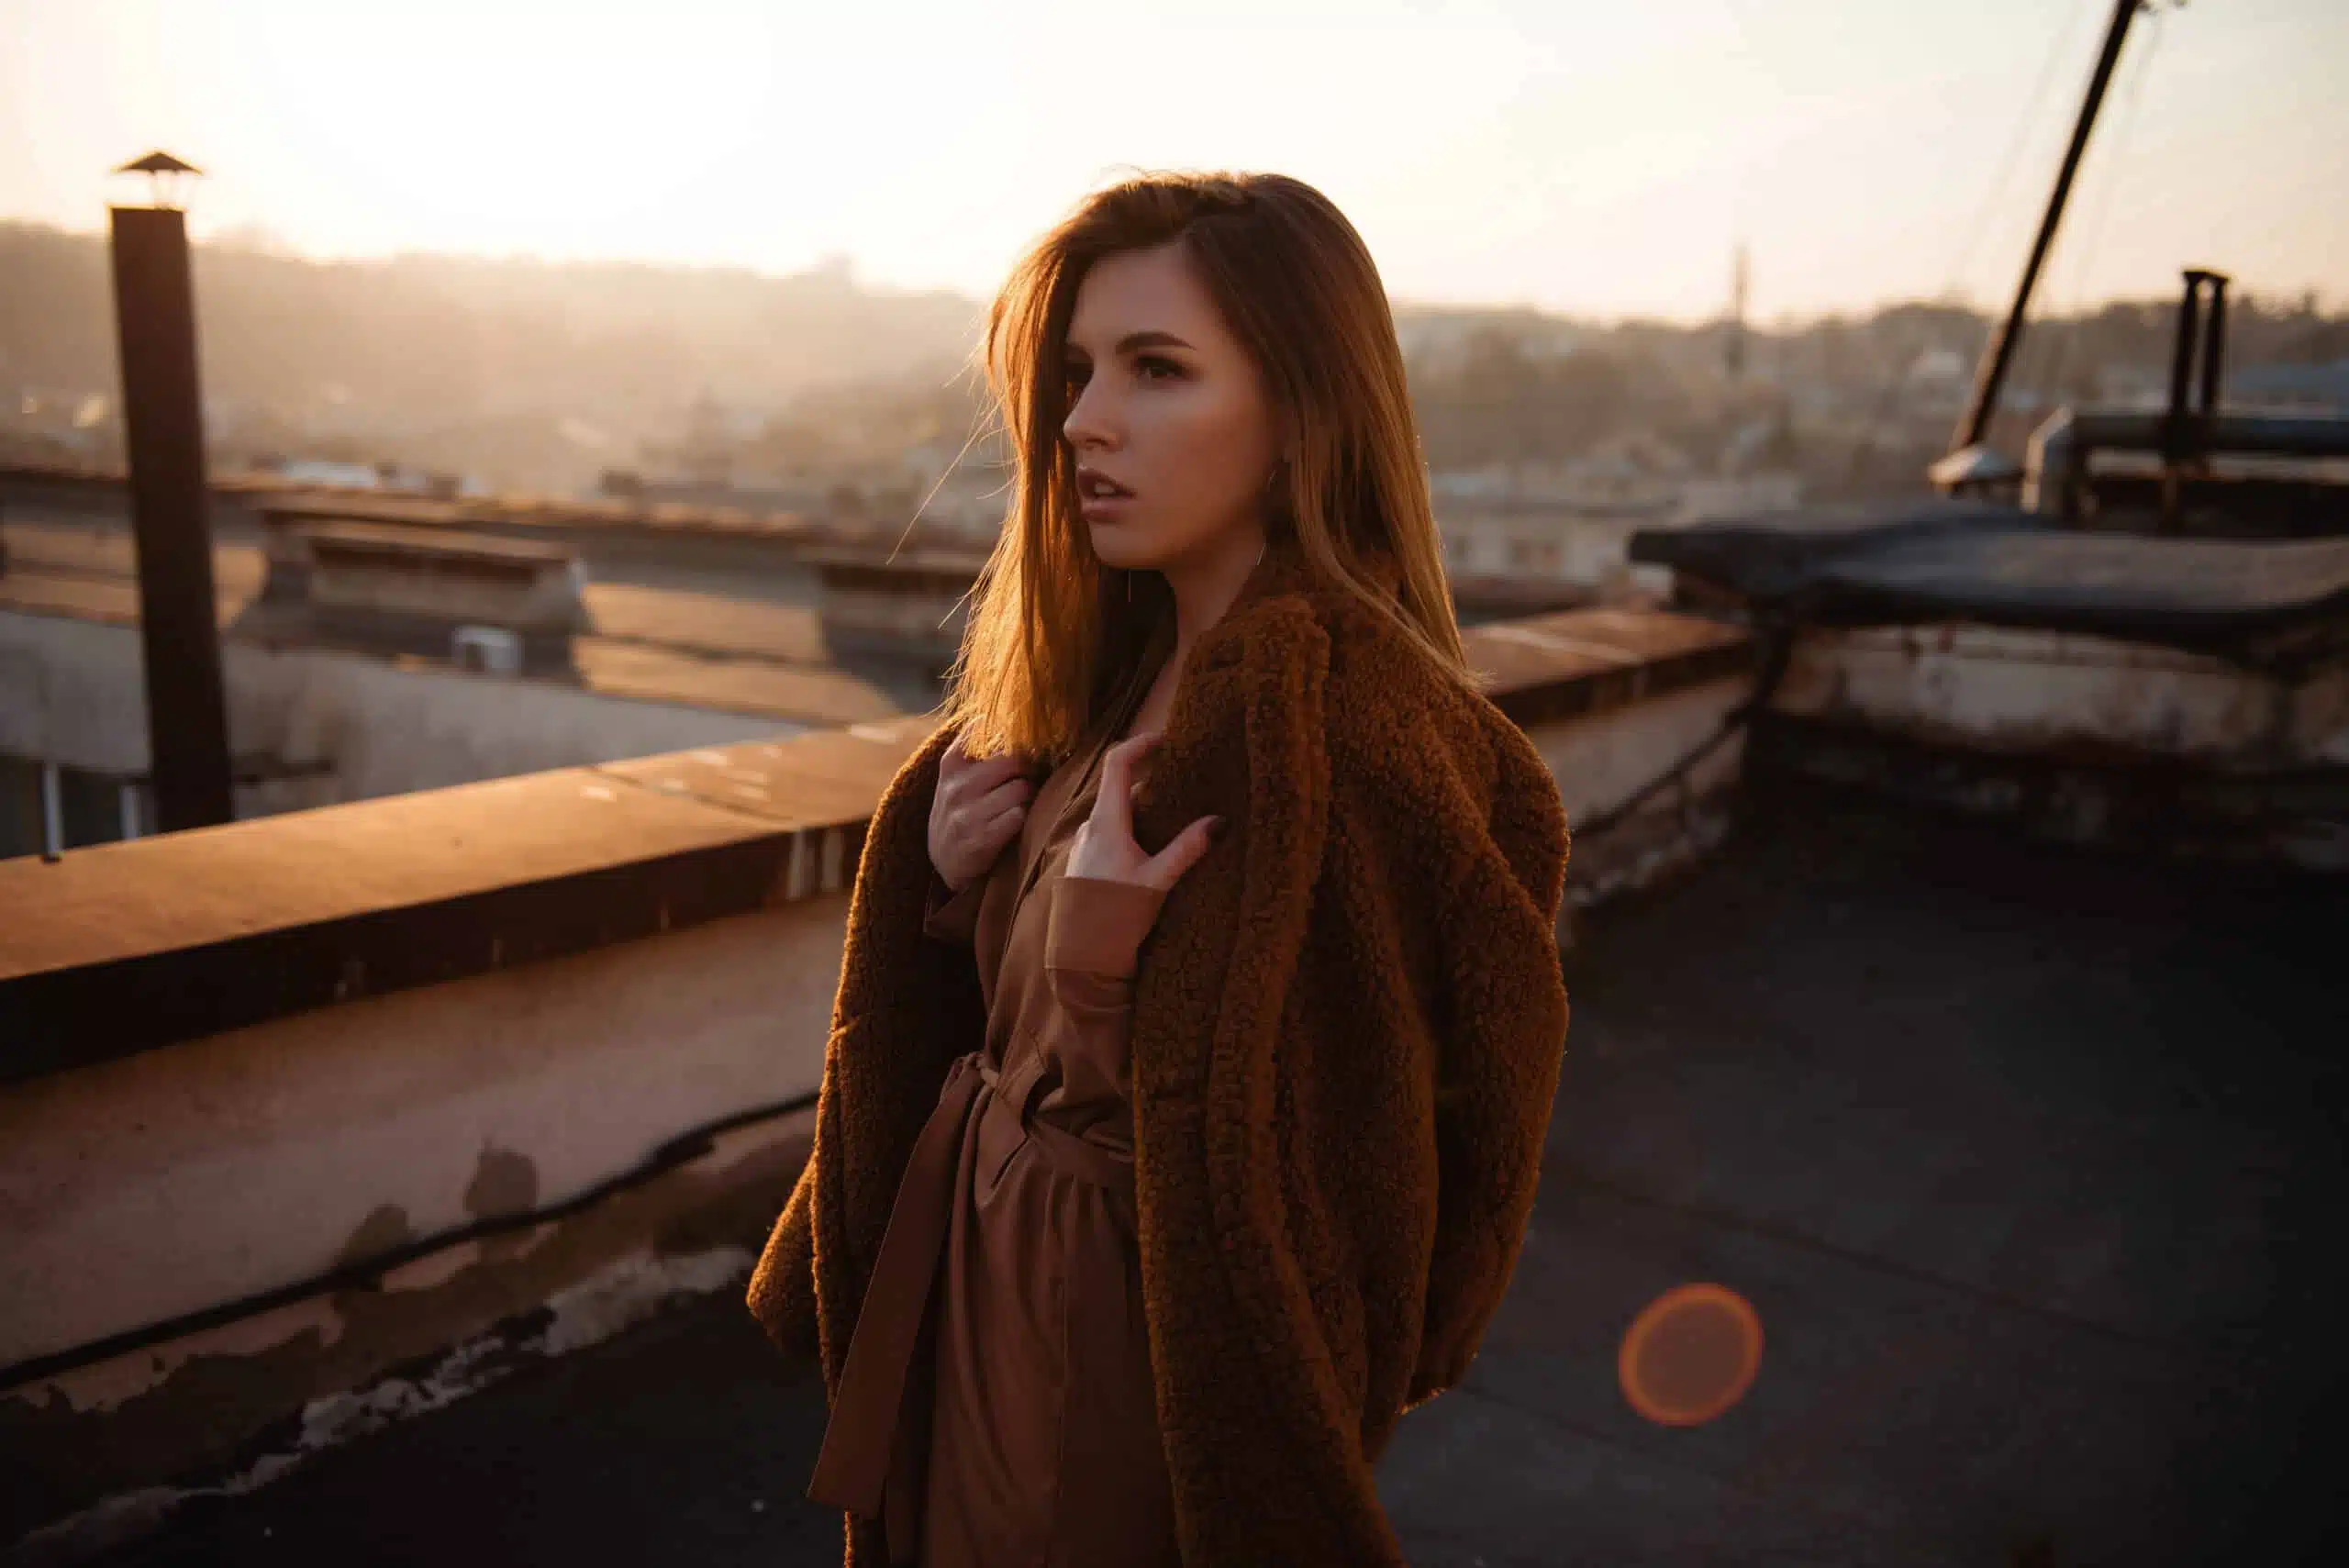 melancholic young woman in dress on rooftop at sunset